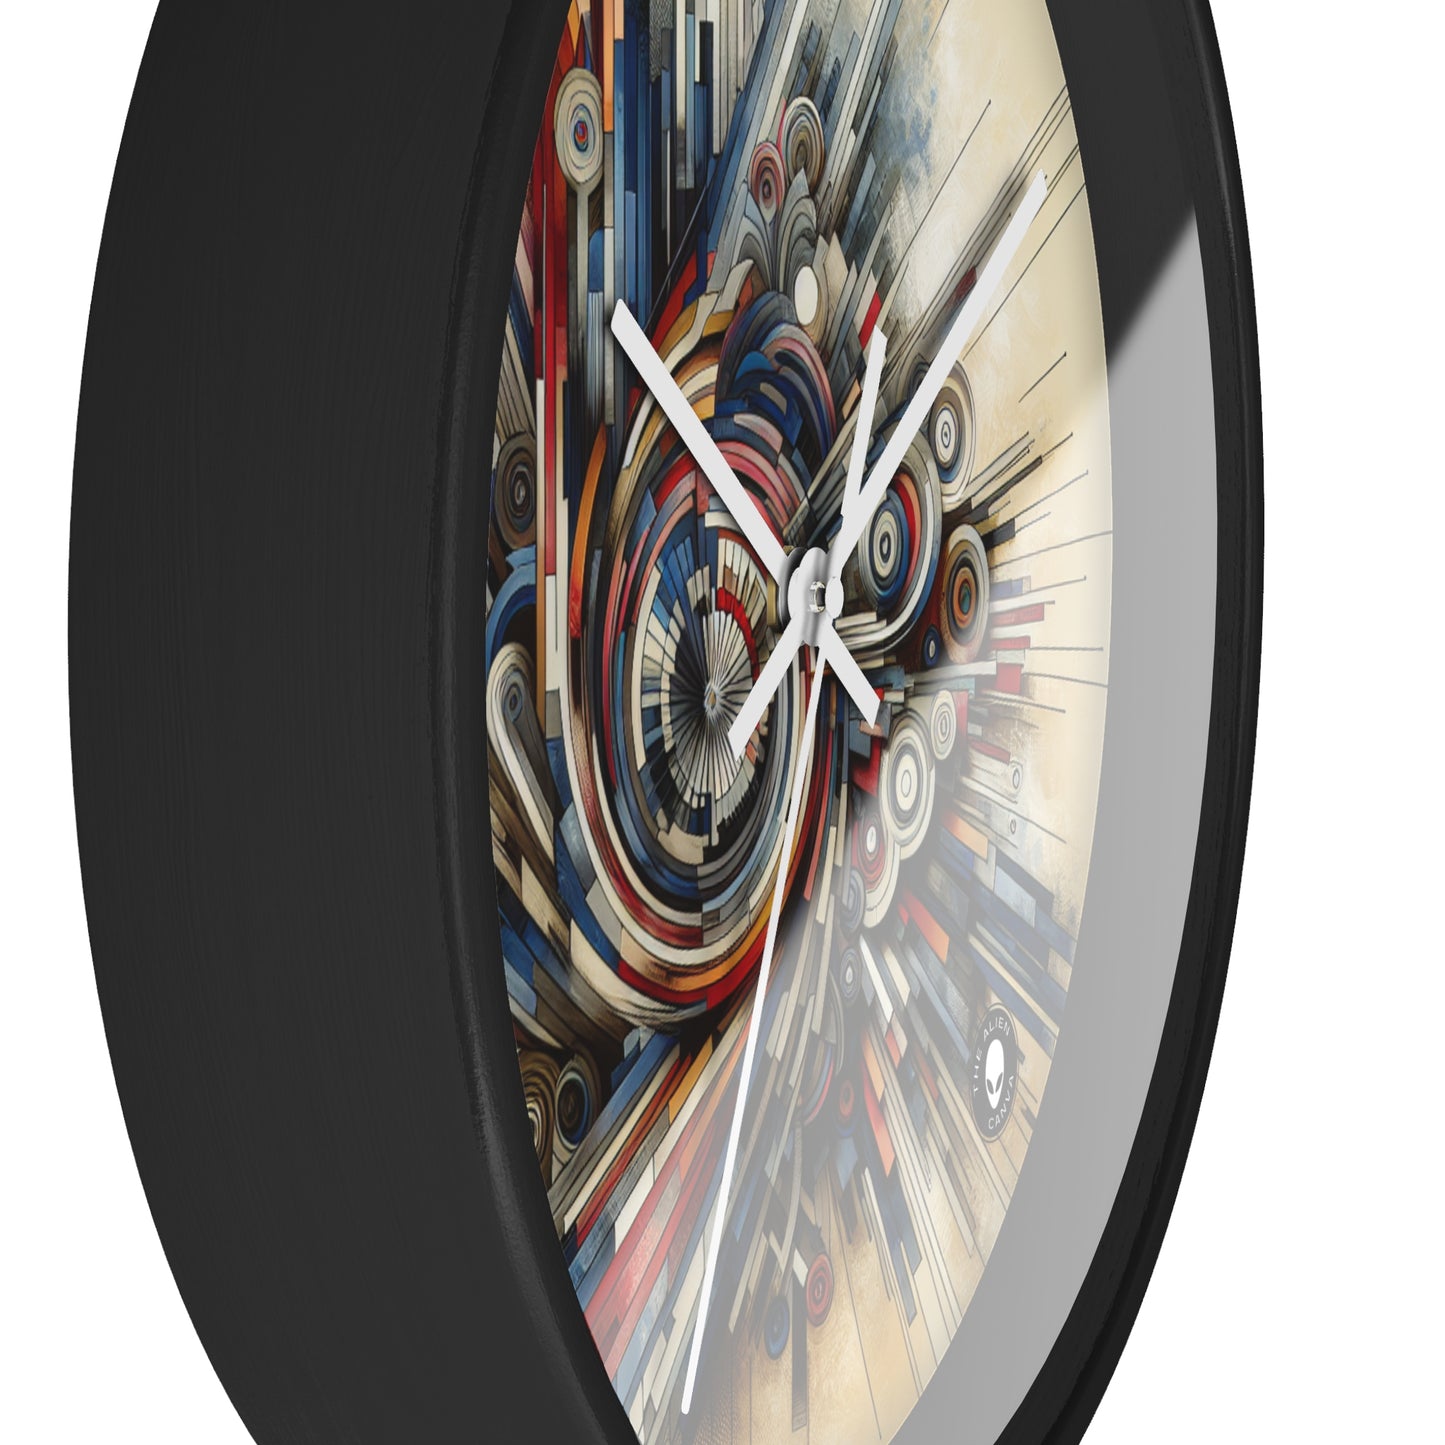 "Fragmented Realms: A Surreal Exploration in Color and Form" - The Alien Wall Clock Avant-garde Art